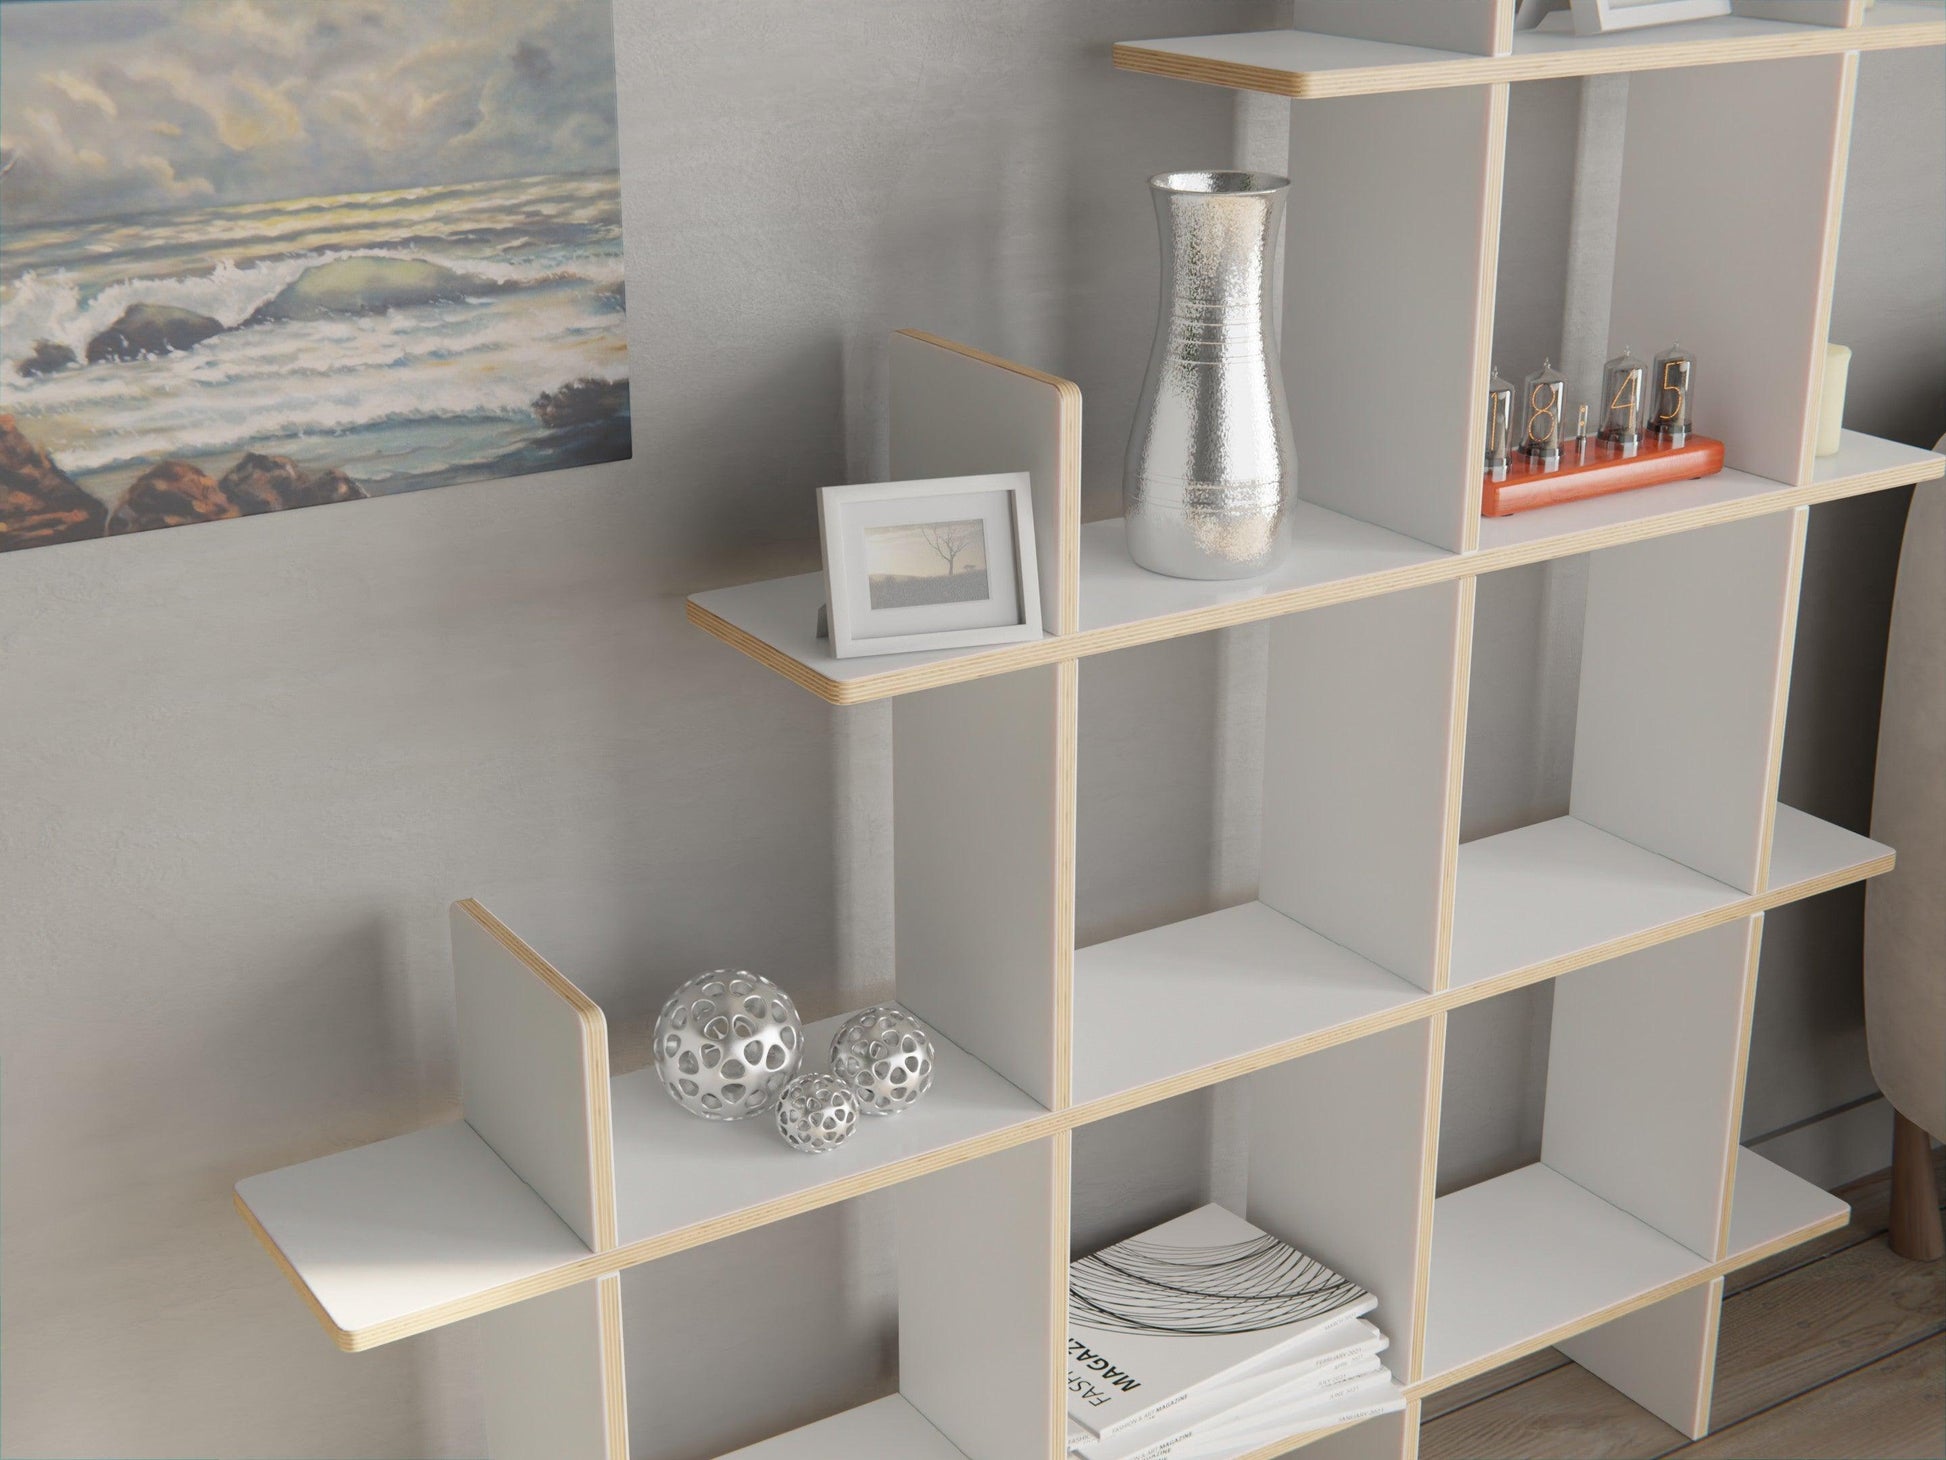 Explore our Modular Shelf Storage System. A plywood modular white bookshelf perfect for your modern space.